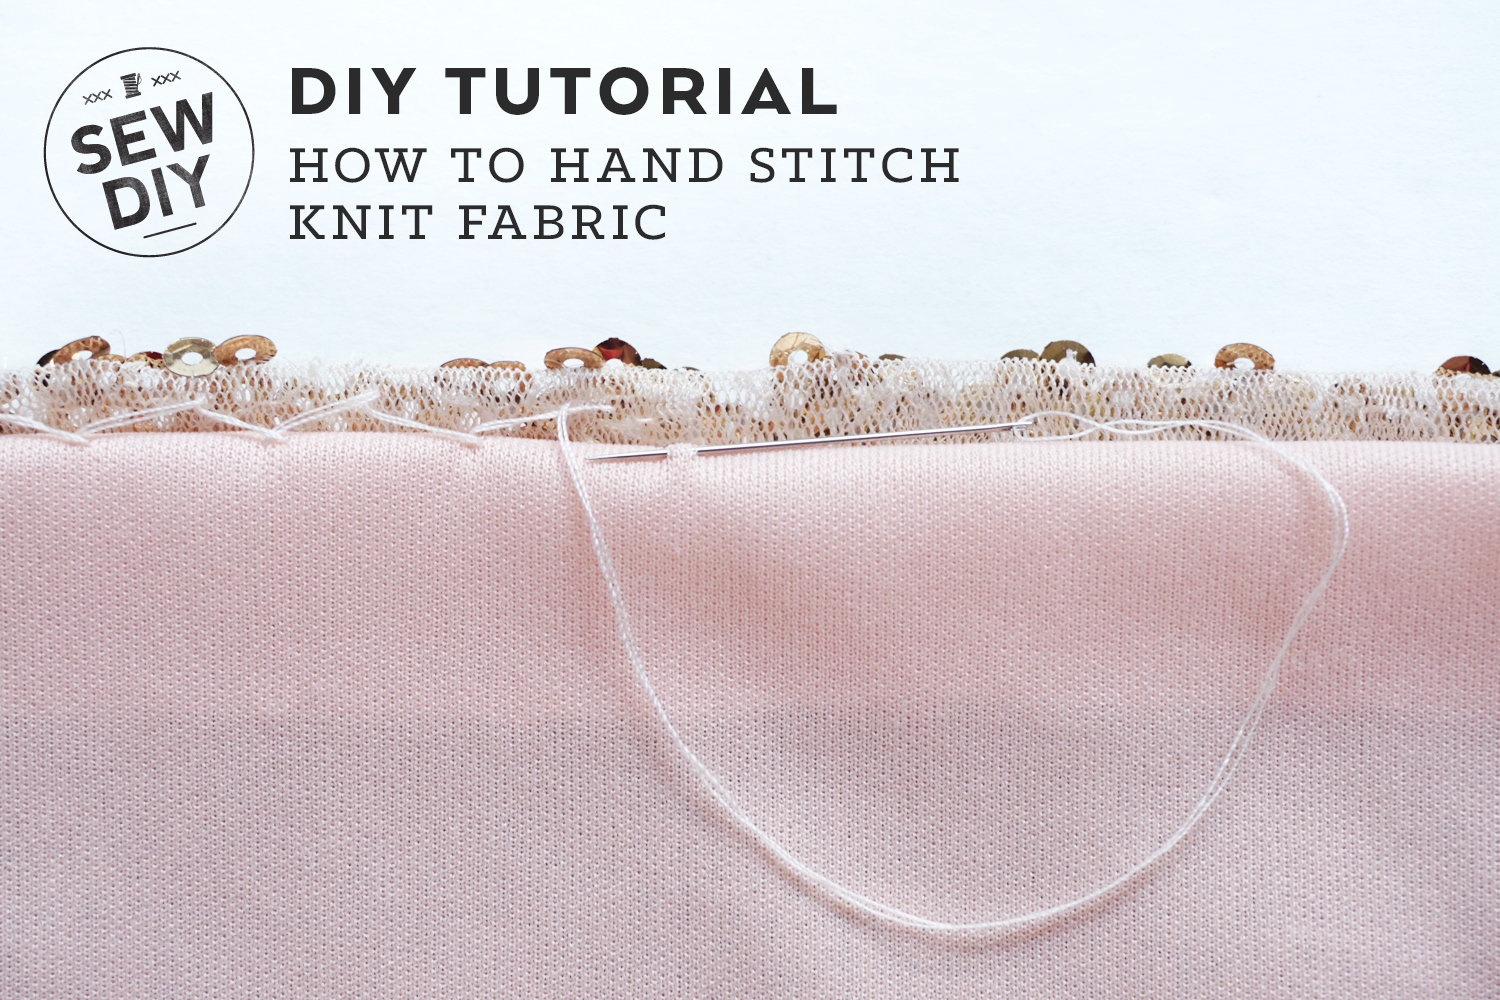 DIY: How to stitch the items with an elastic thread. Sewing